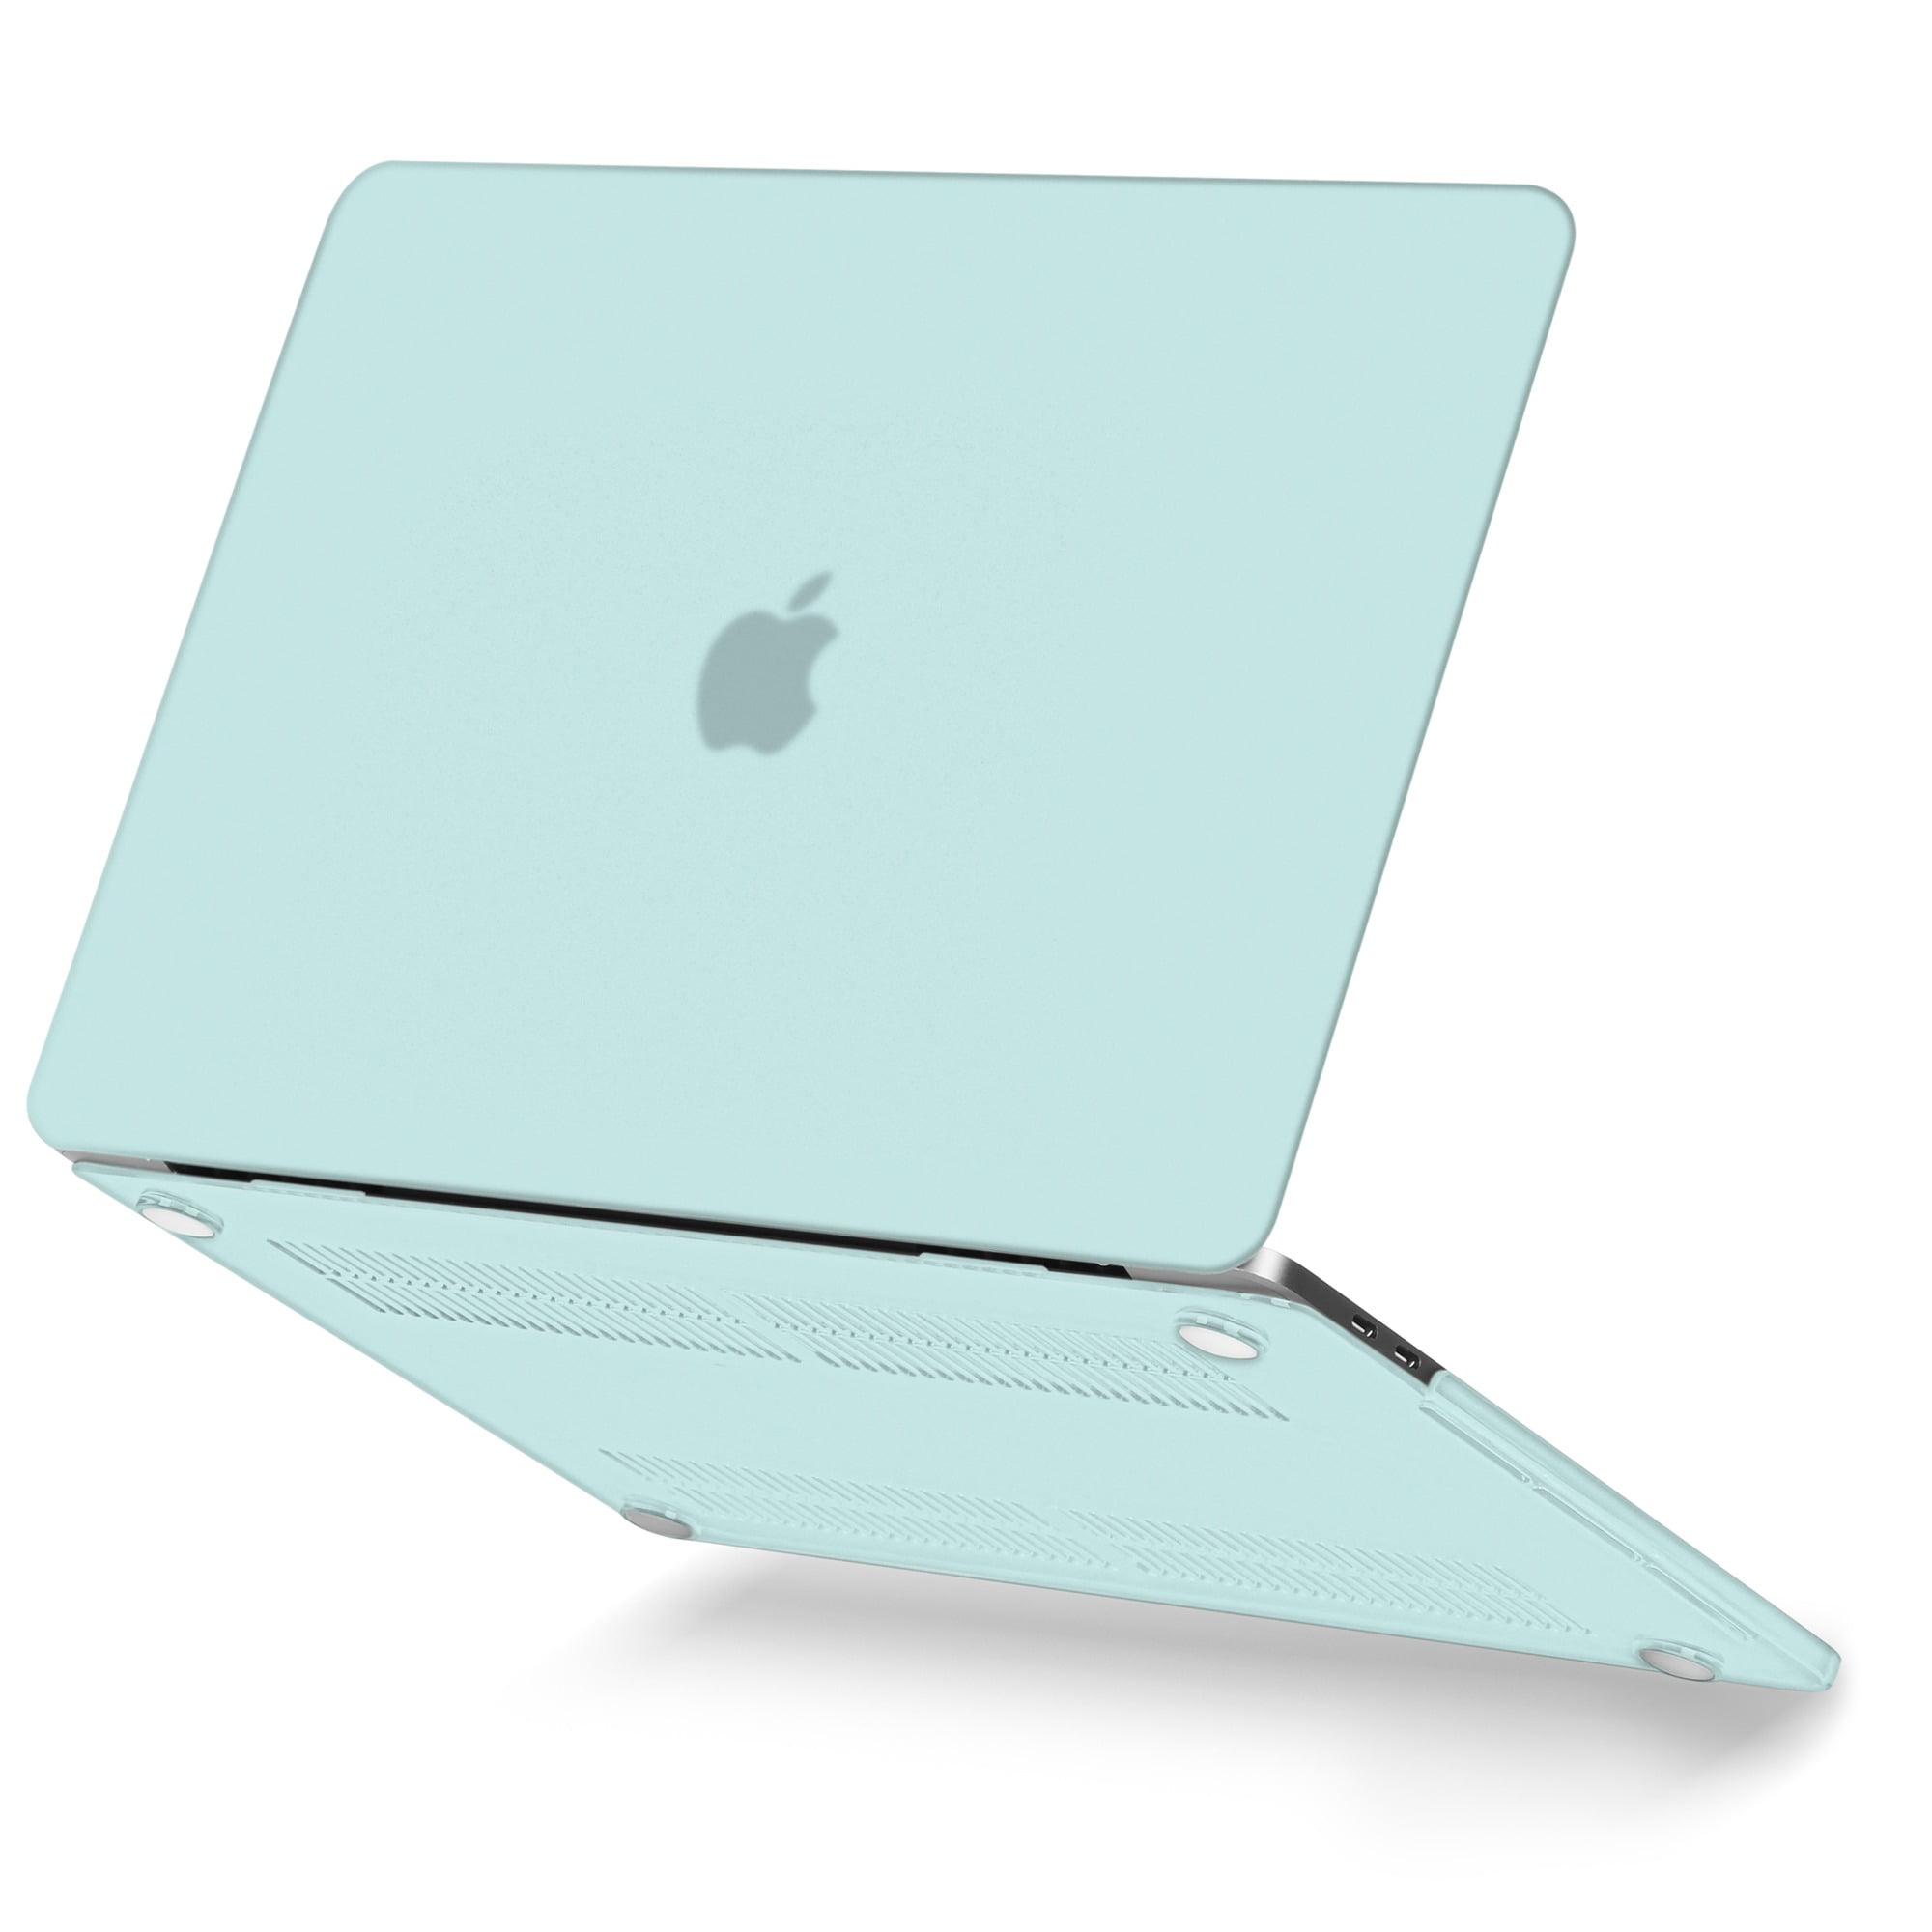 A1342 13-inch Matte Hard Rubberized Case Cover For Apple Macbook White 